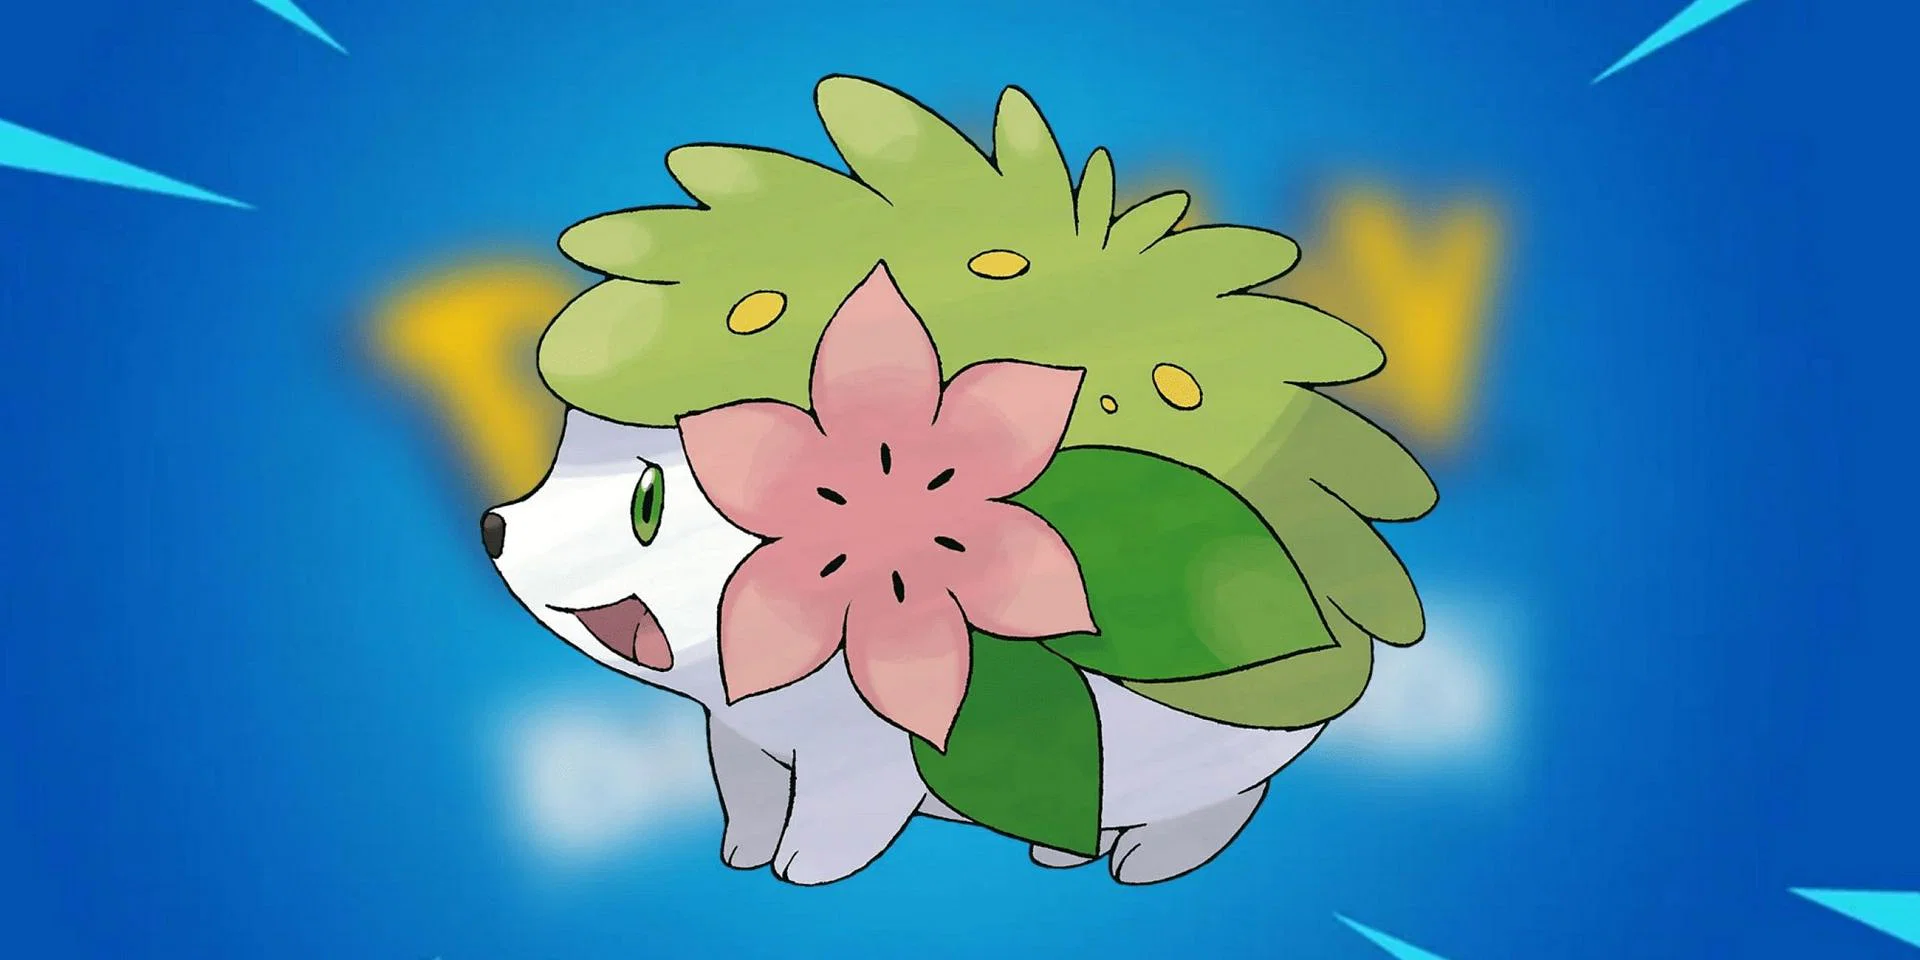 How To Get Shaymin In Pokemon Go?